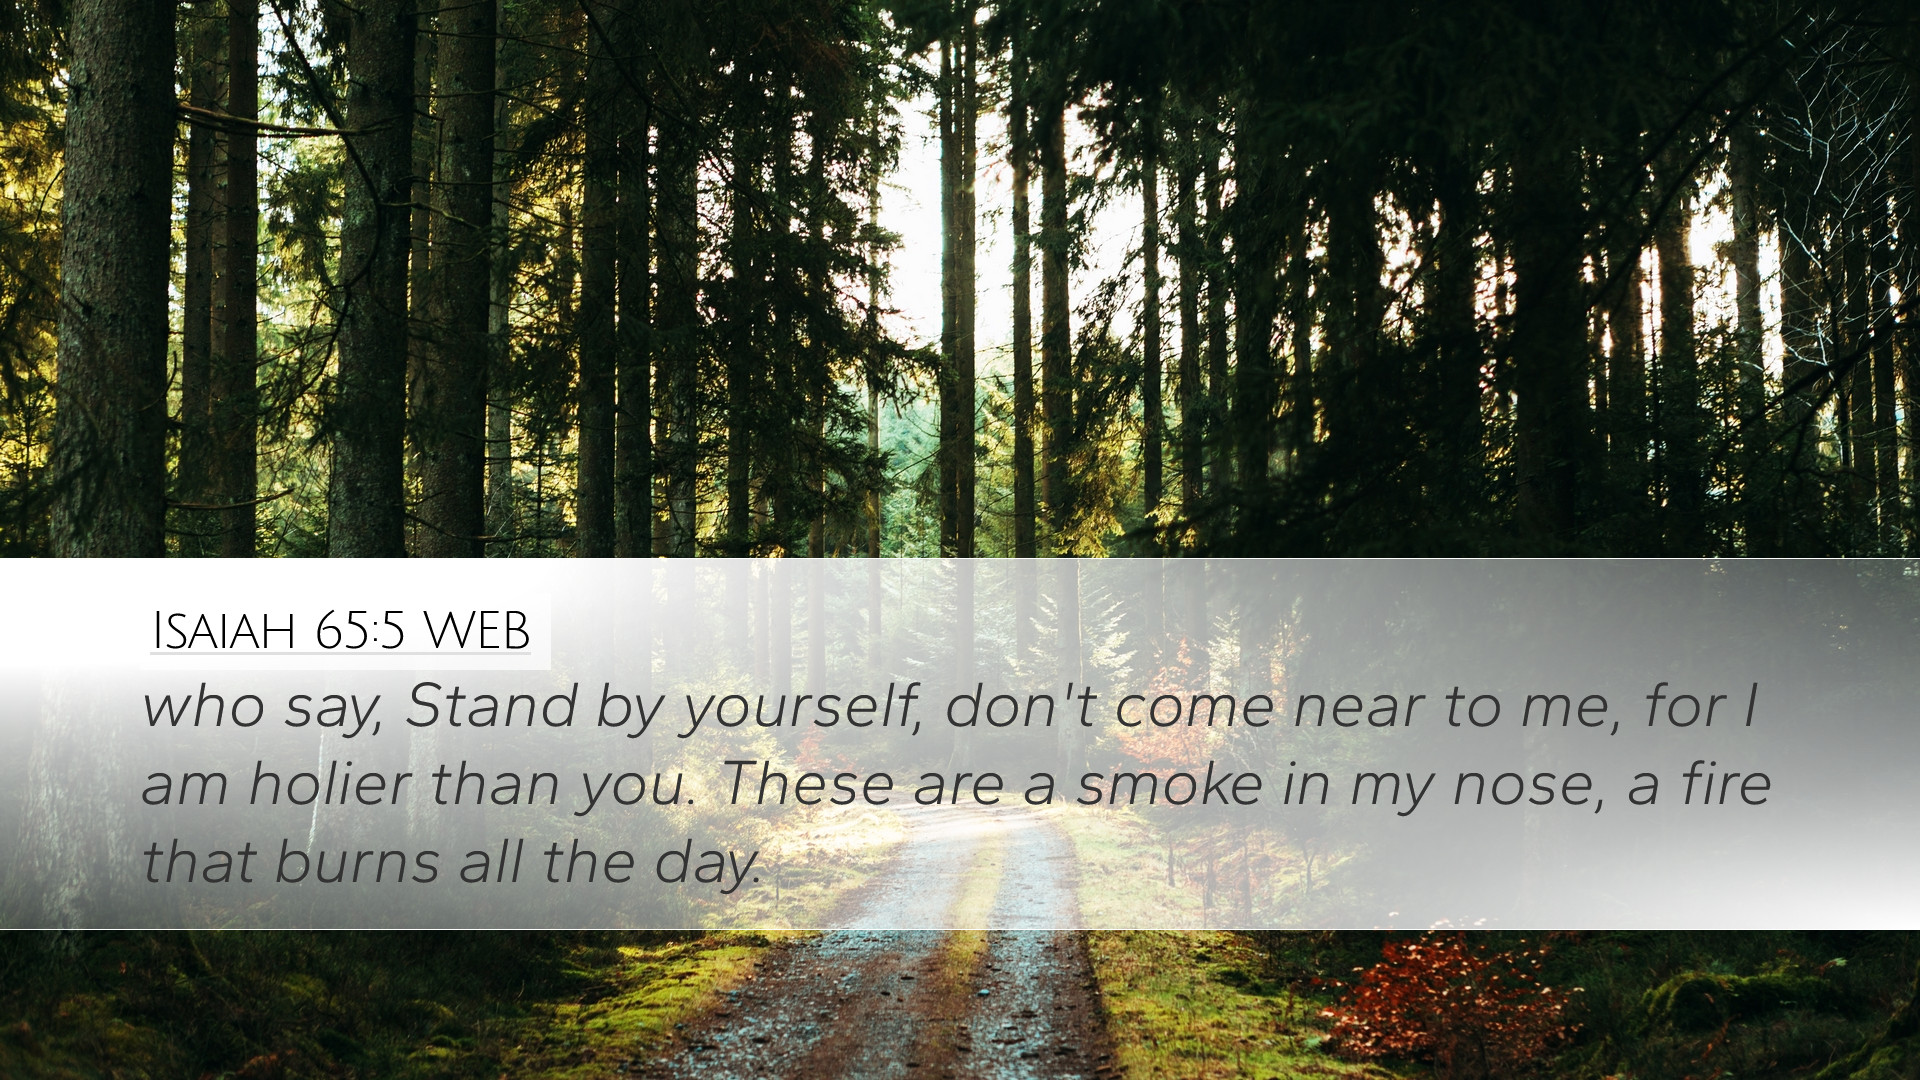 Isaiah 65:5 WEB Desktop Wallpaper say, Stand by yourself, don't come near to